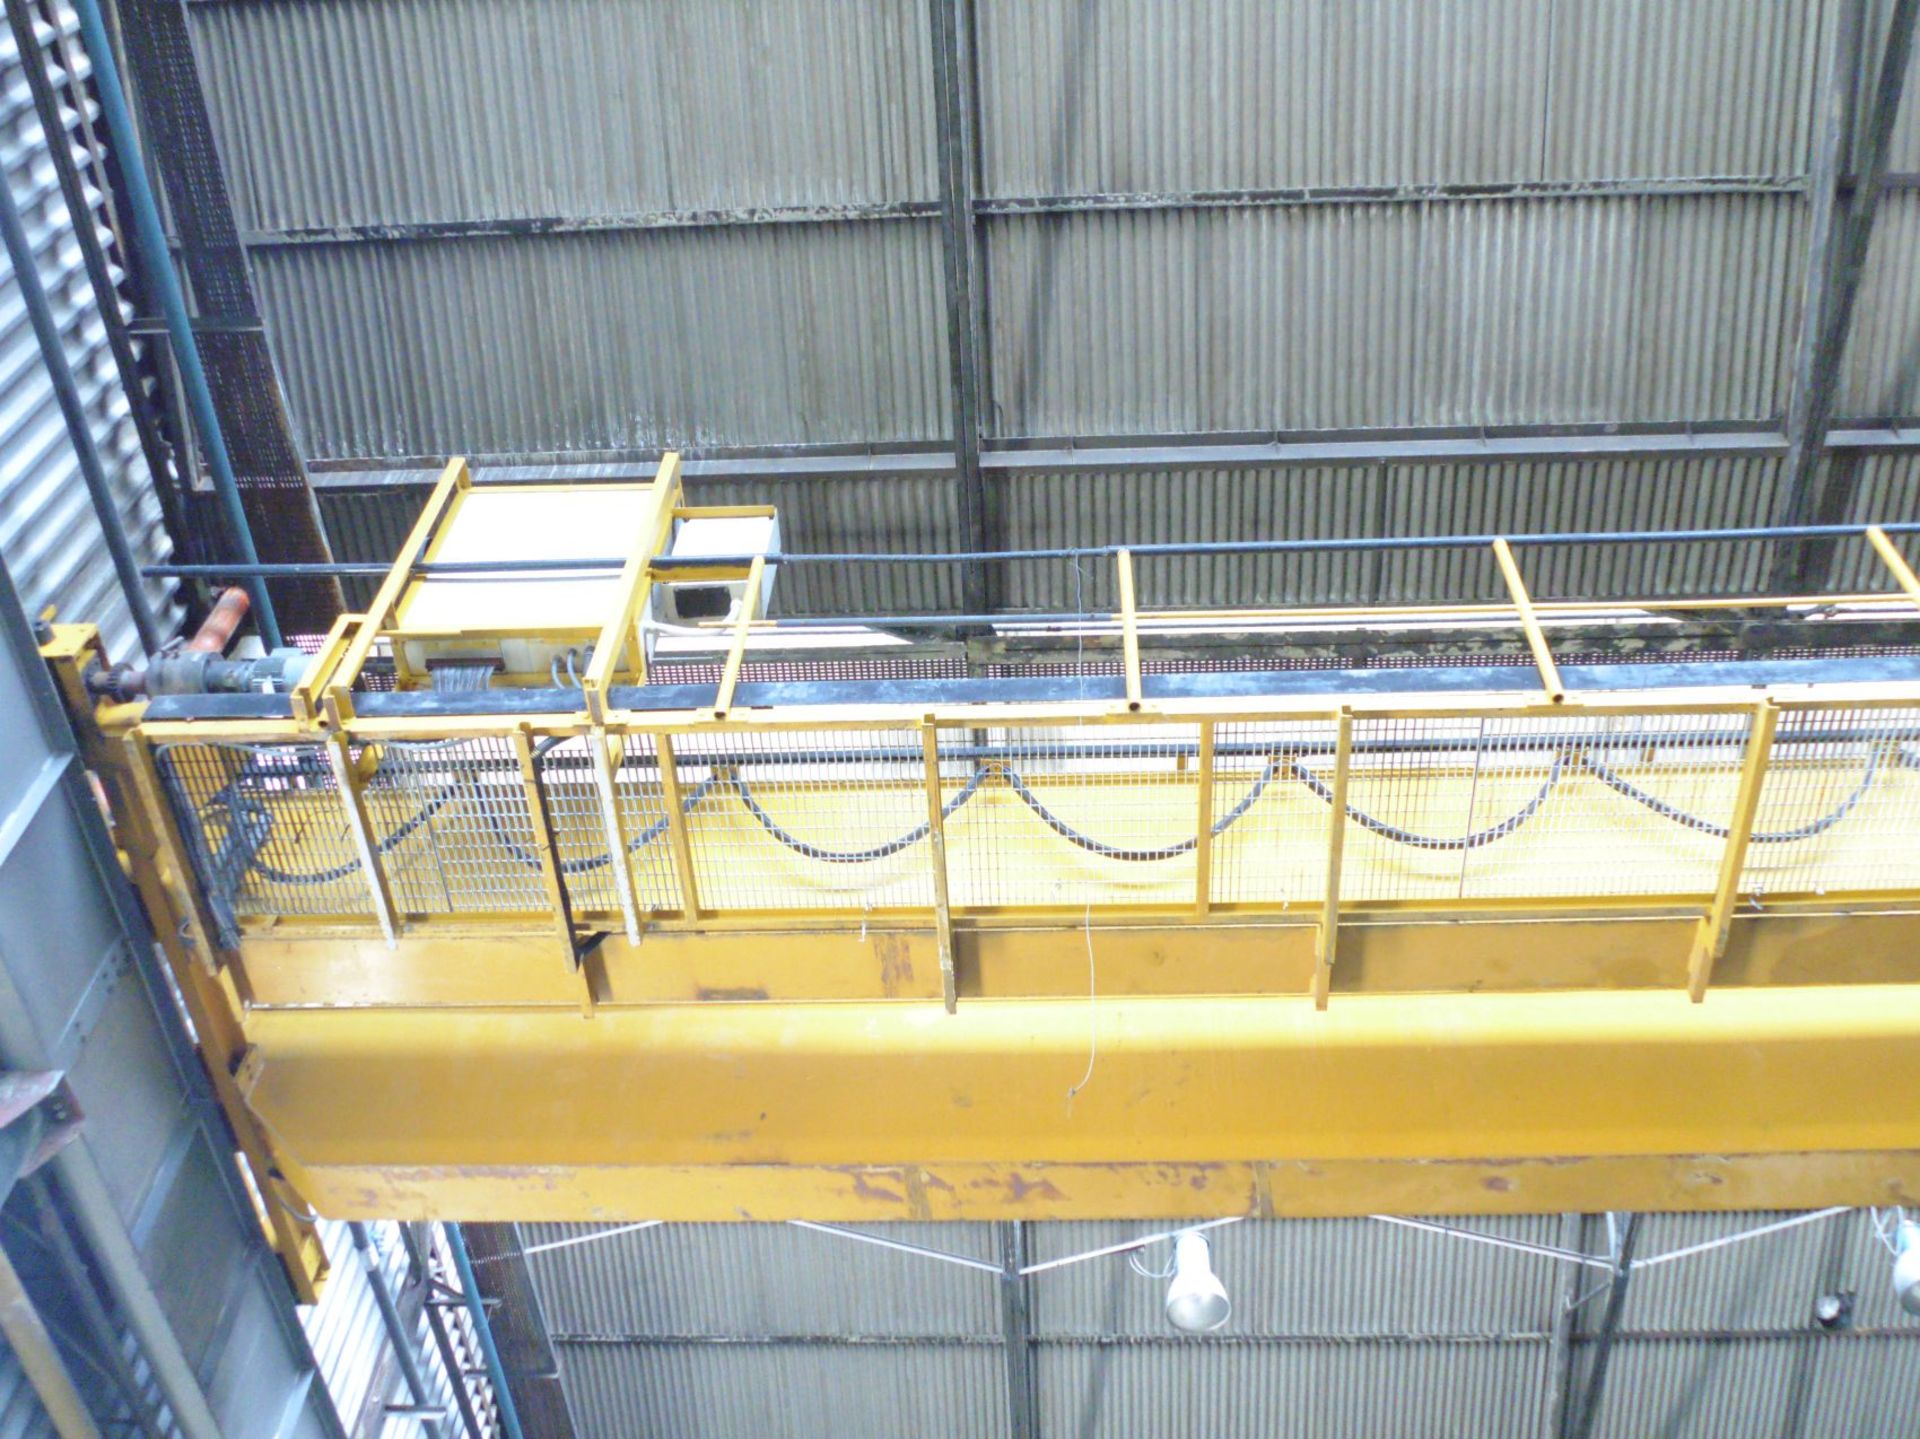 Twin Beam Overhead Travelling Gantry Crane; make and capacity unknown; span 19m, believed to be 20 - Image 3 of 5